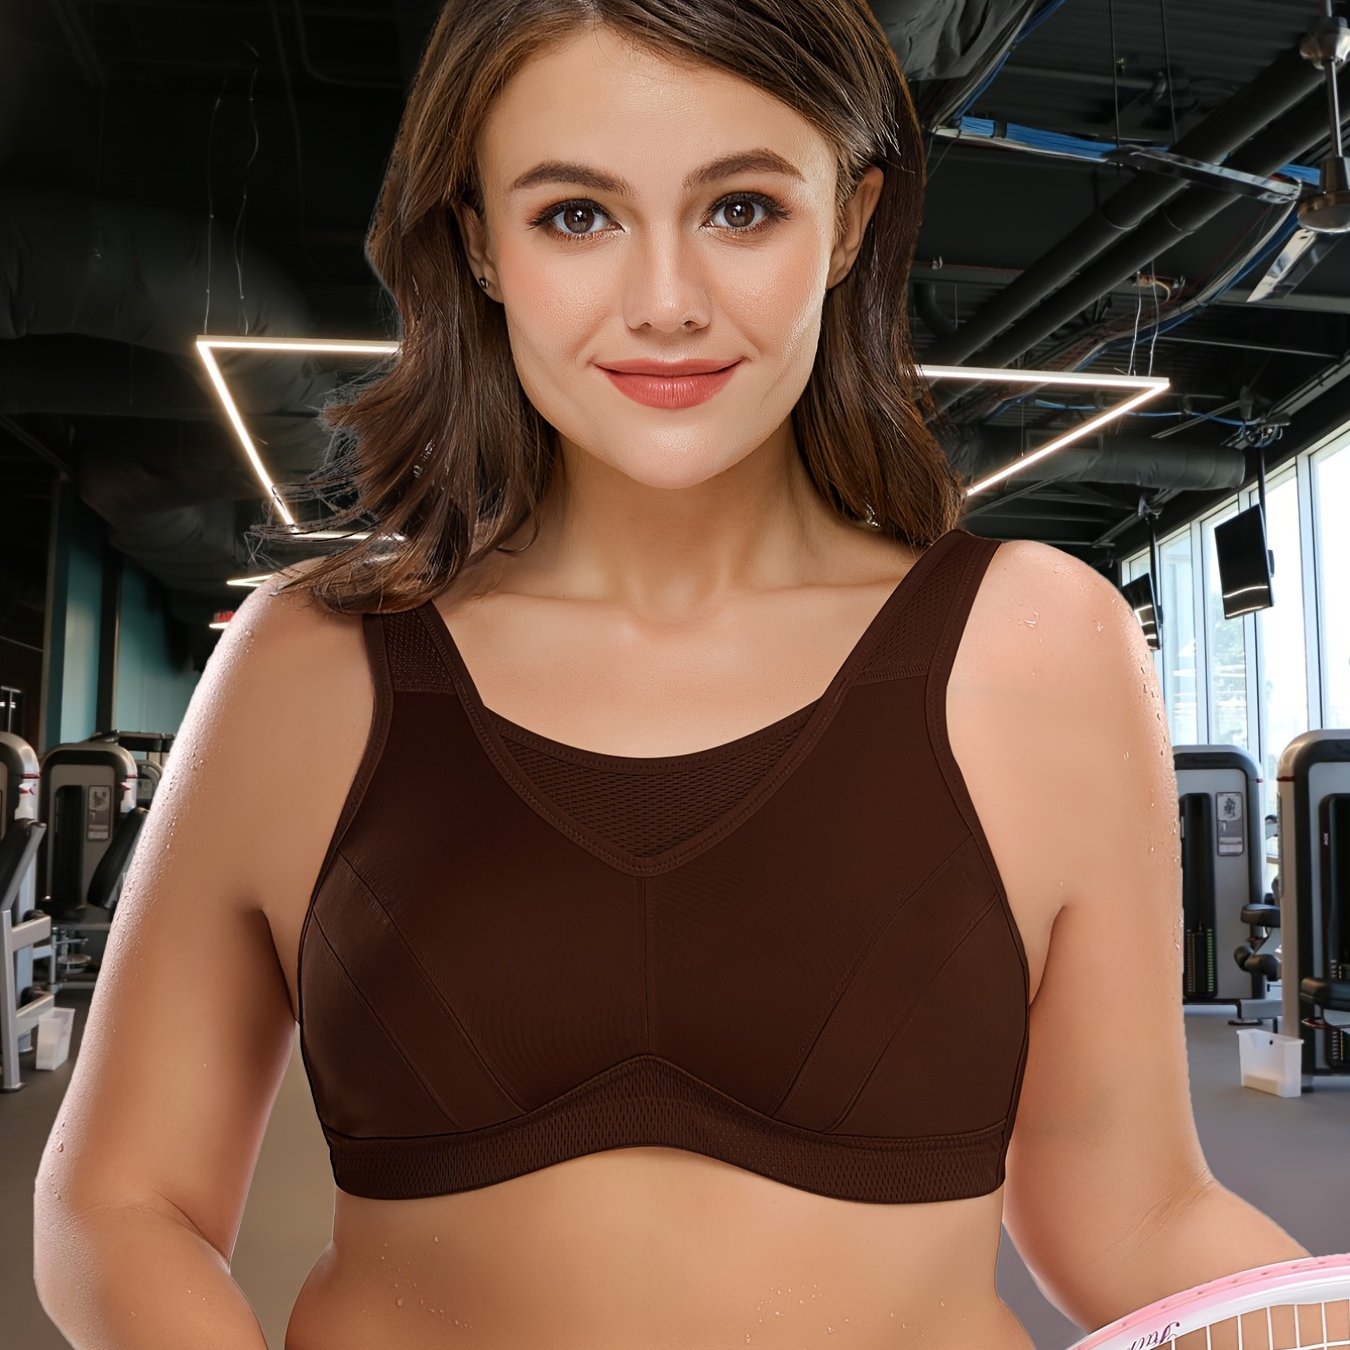 High Impact Bounce Control Crop Top For Women Plus Size XXXL Female Fitness  Bra With Padded Support For Running, Yoga, And Sports 2018 Fashion From  Yuanmu23, $16.3